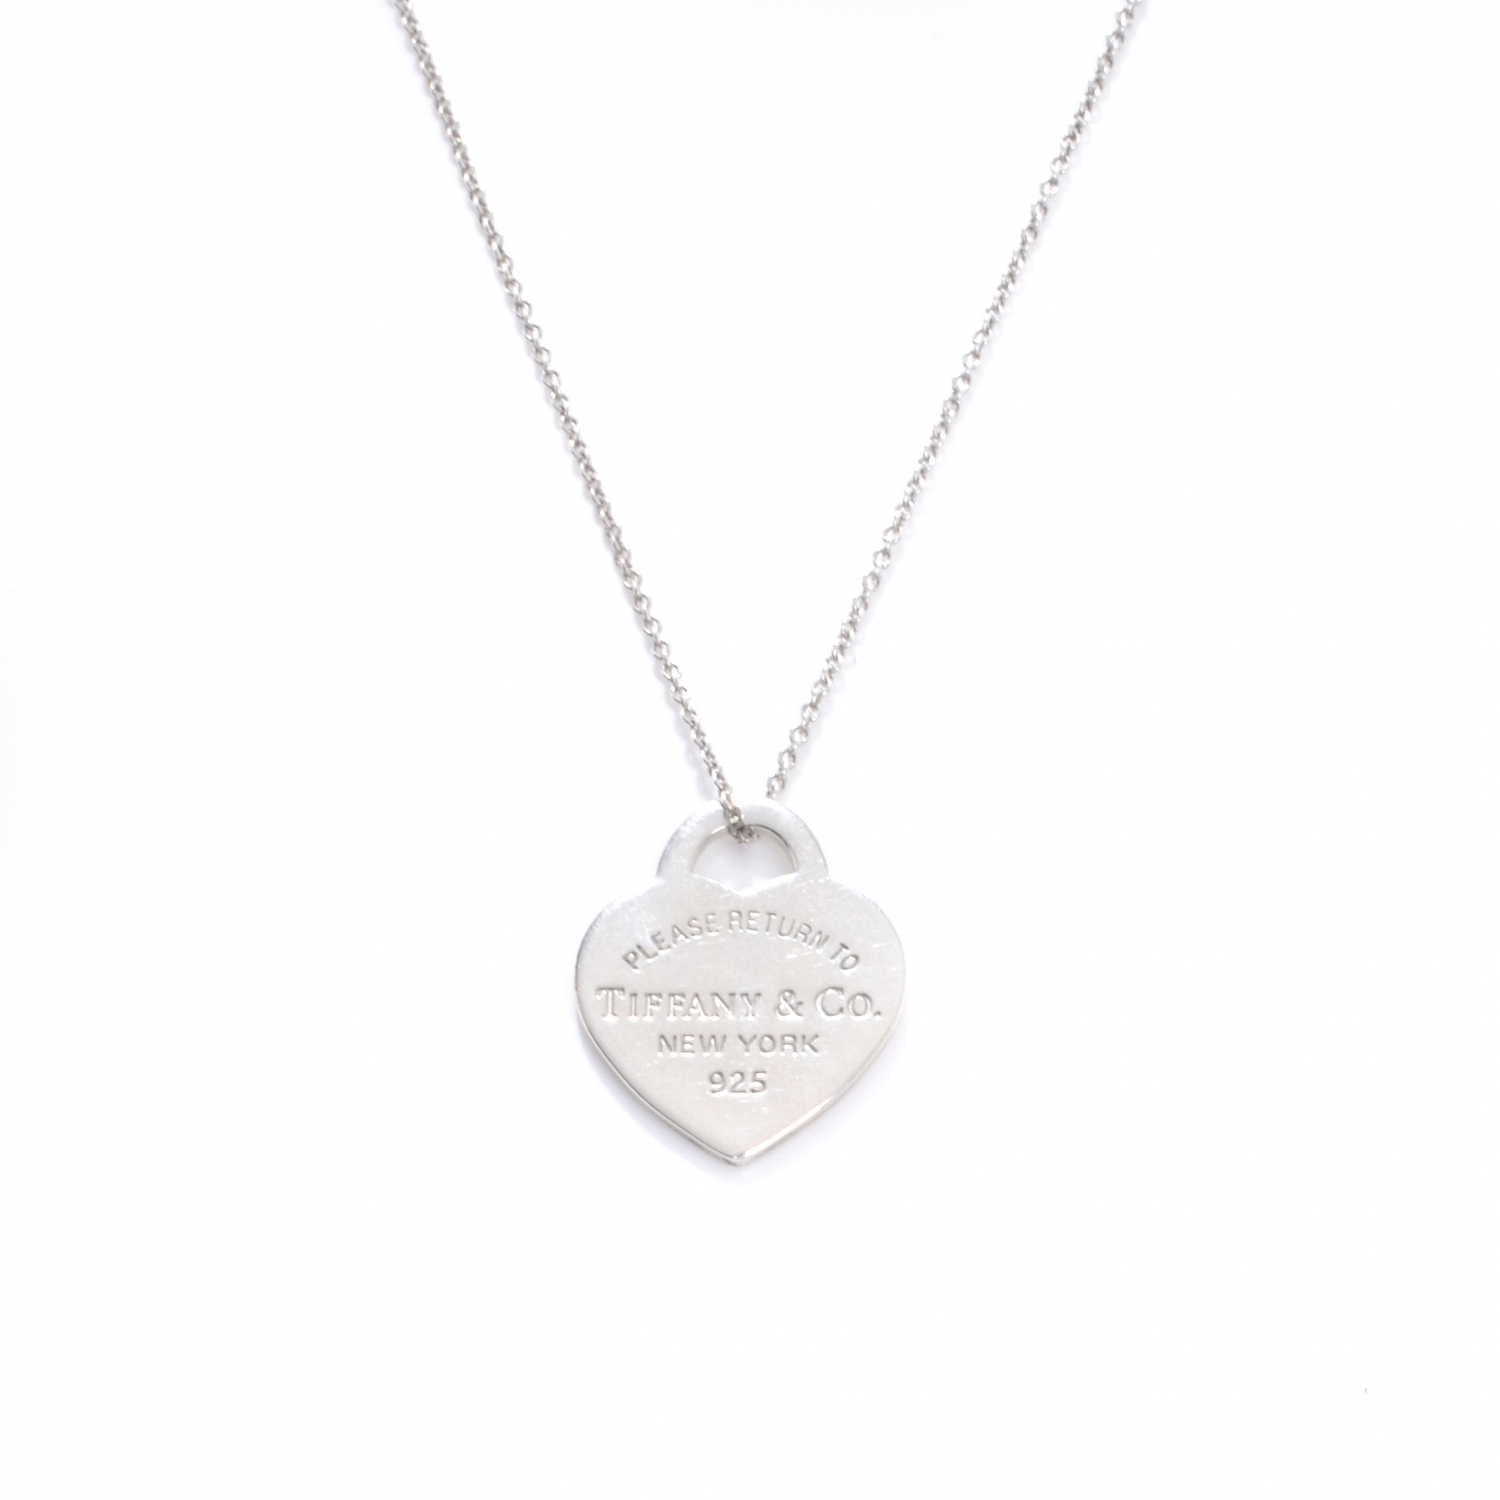 TIFFANY Sterling Silver Return To Tiffany Heart Pendant Necklace 46307